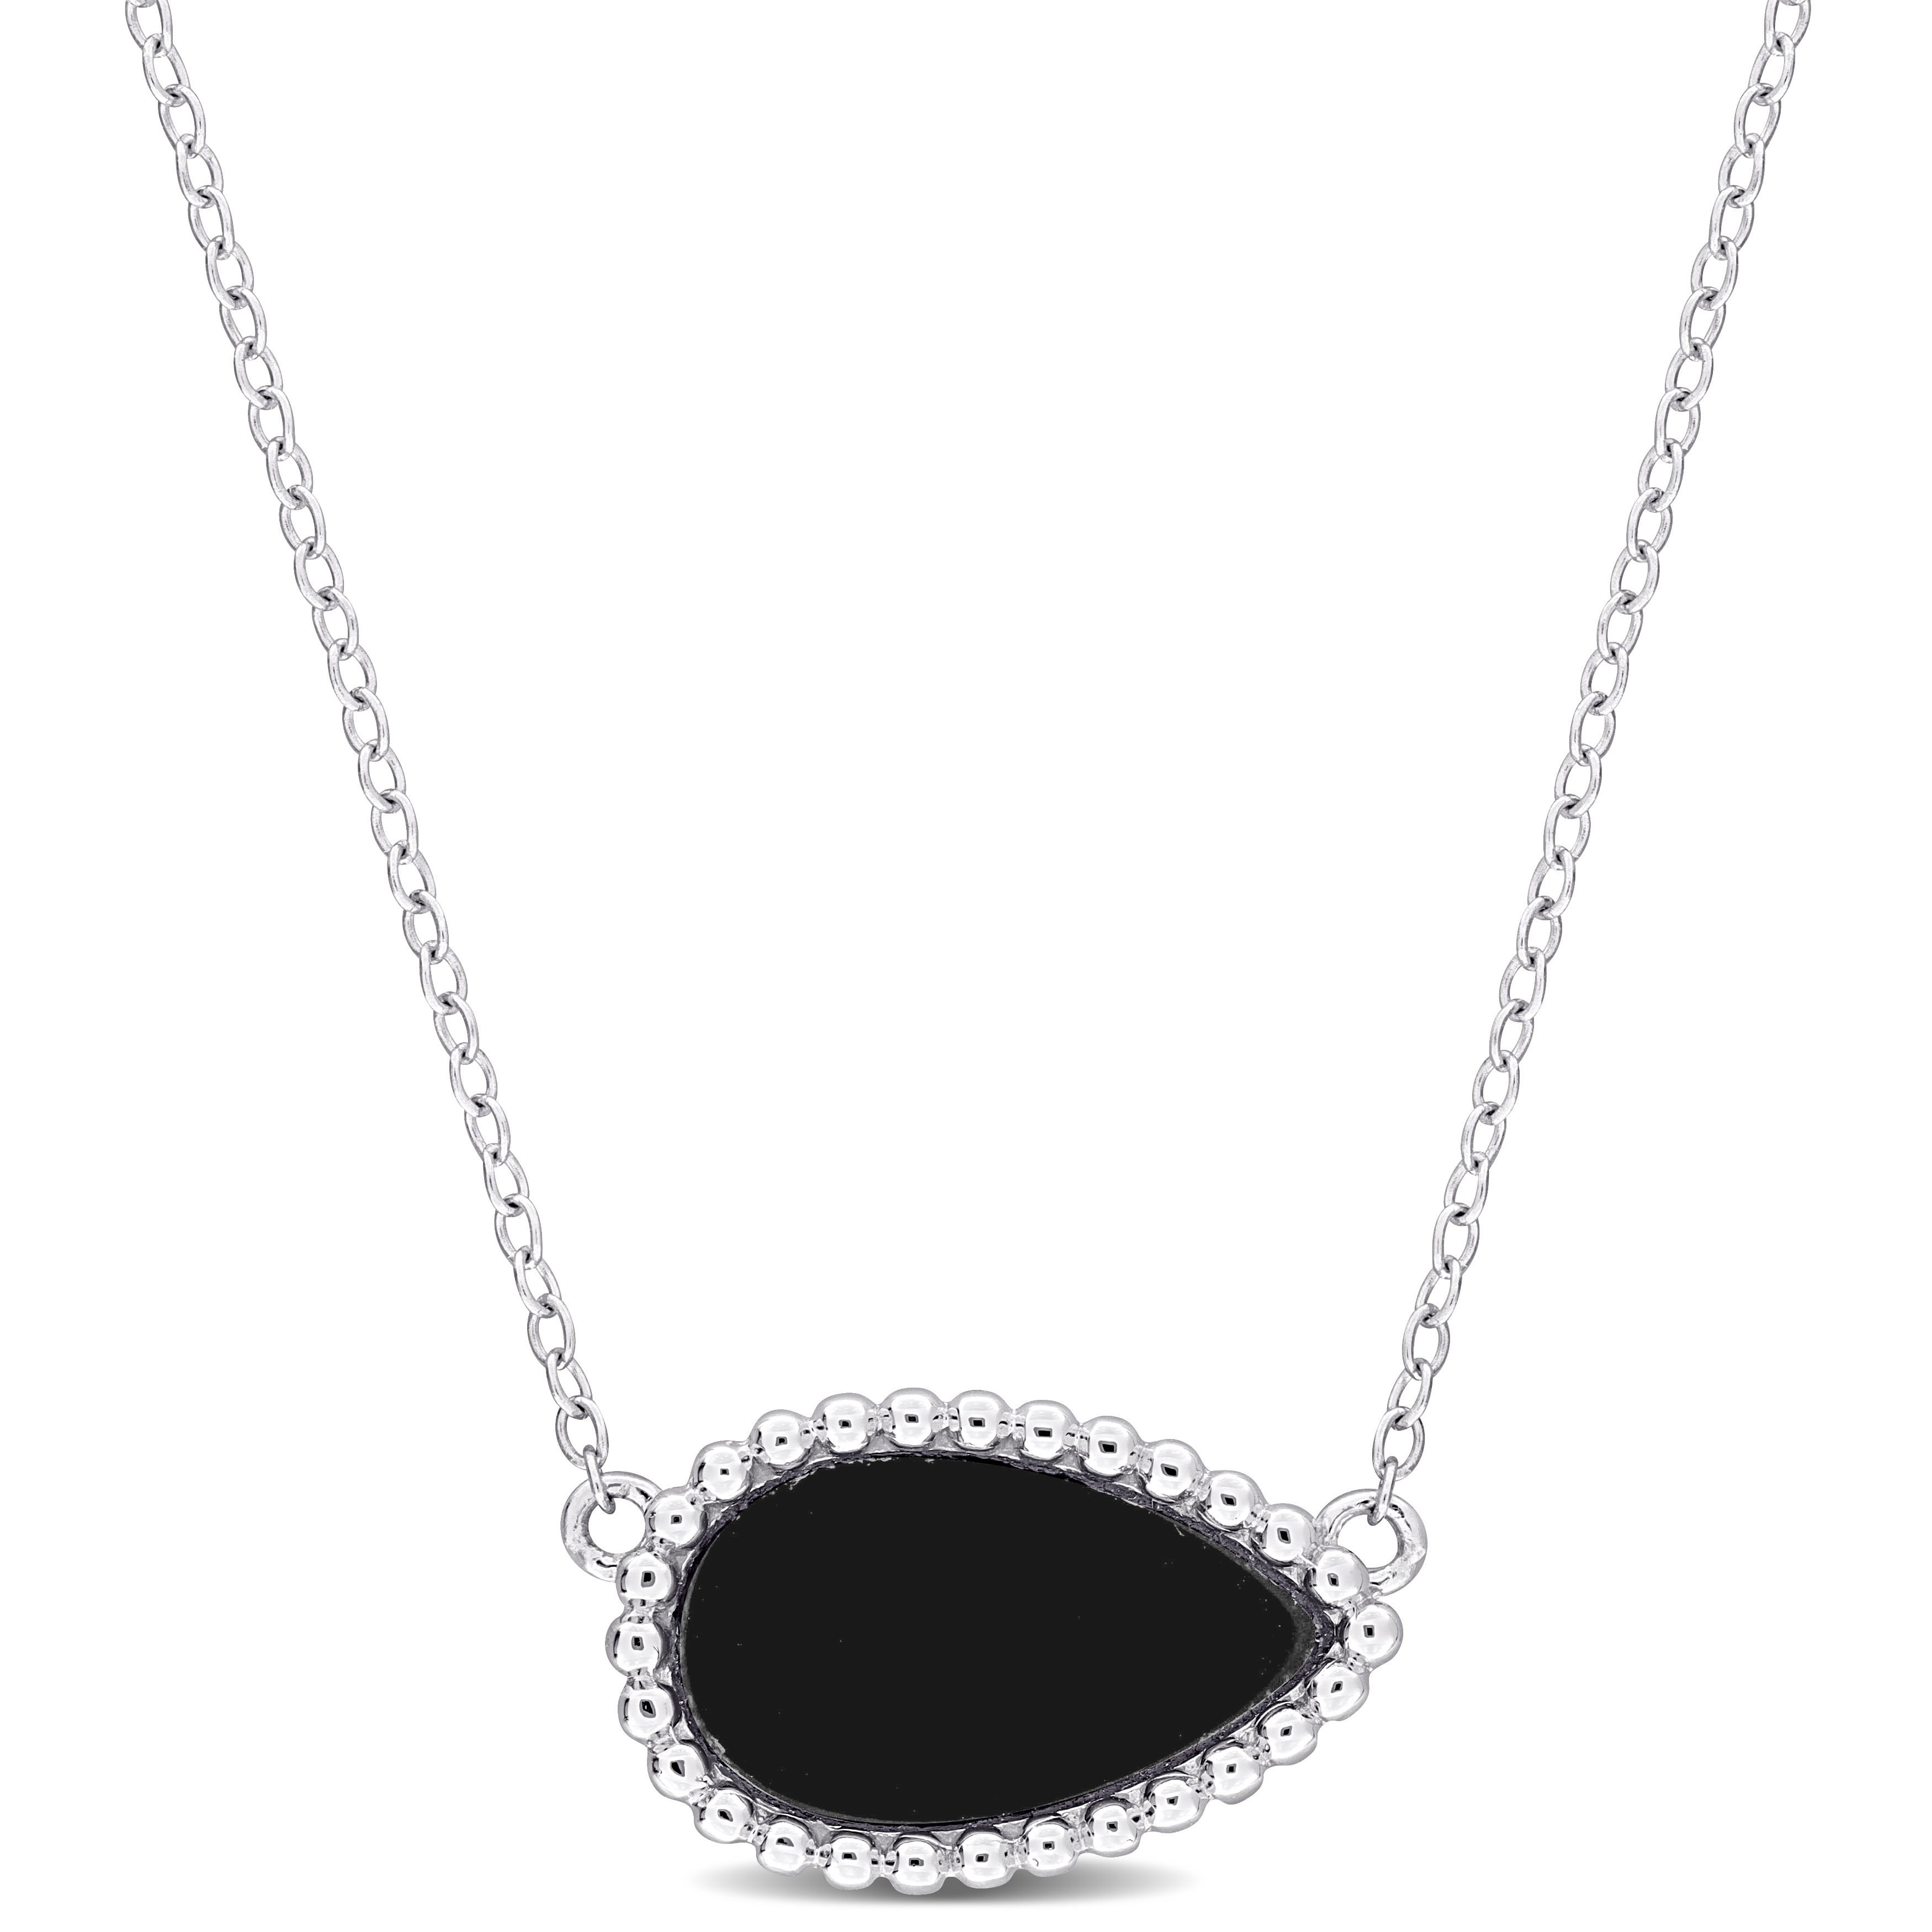 4 CT TGW Pear Shape Black Agate Necklace With Beaded Halo in Sterling Silver - 17 in.